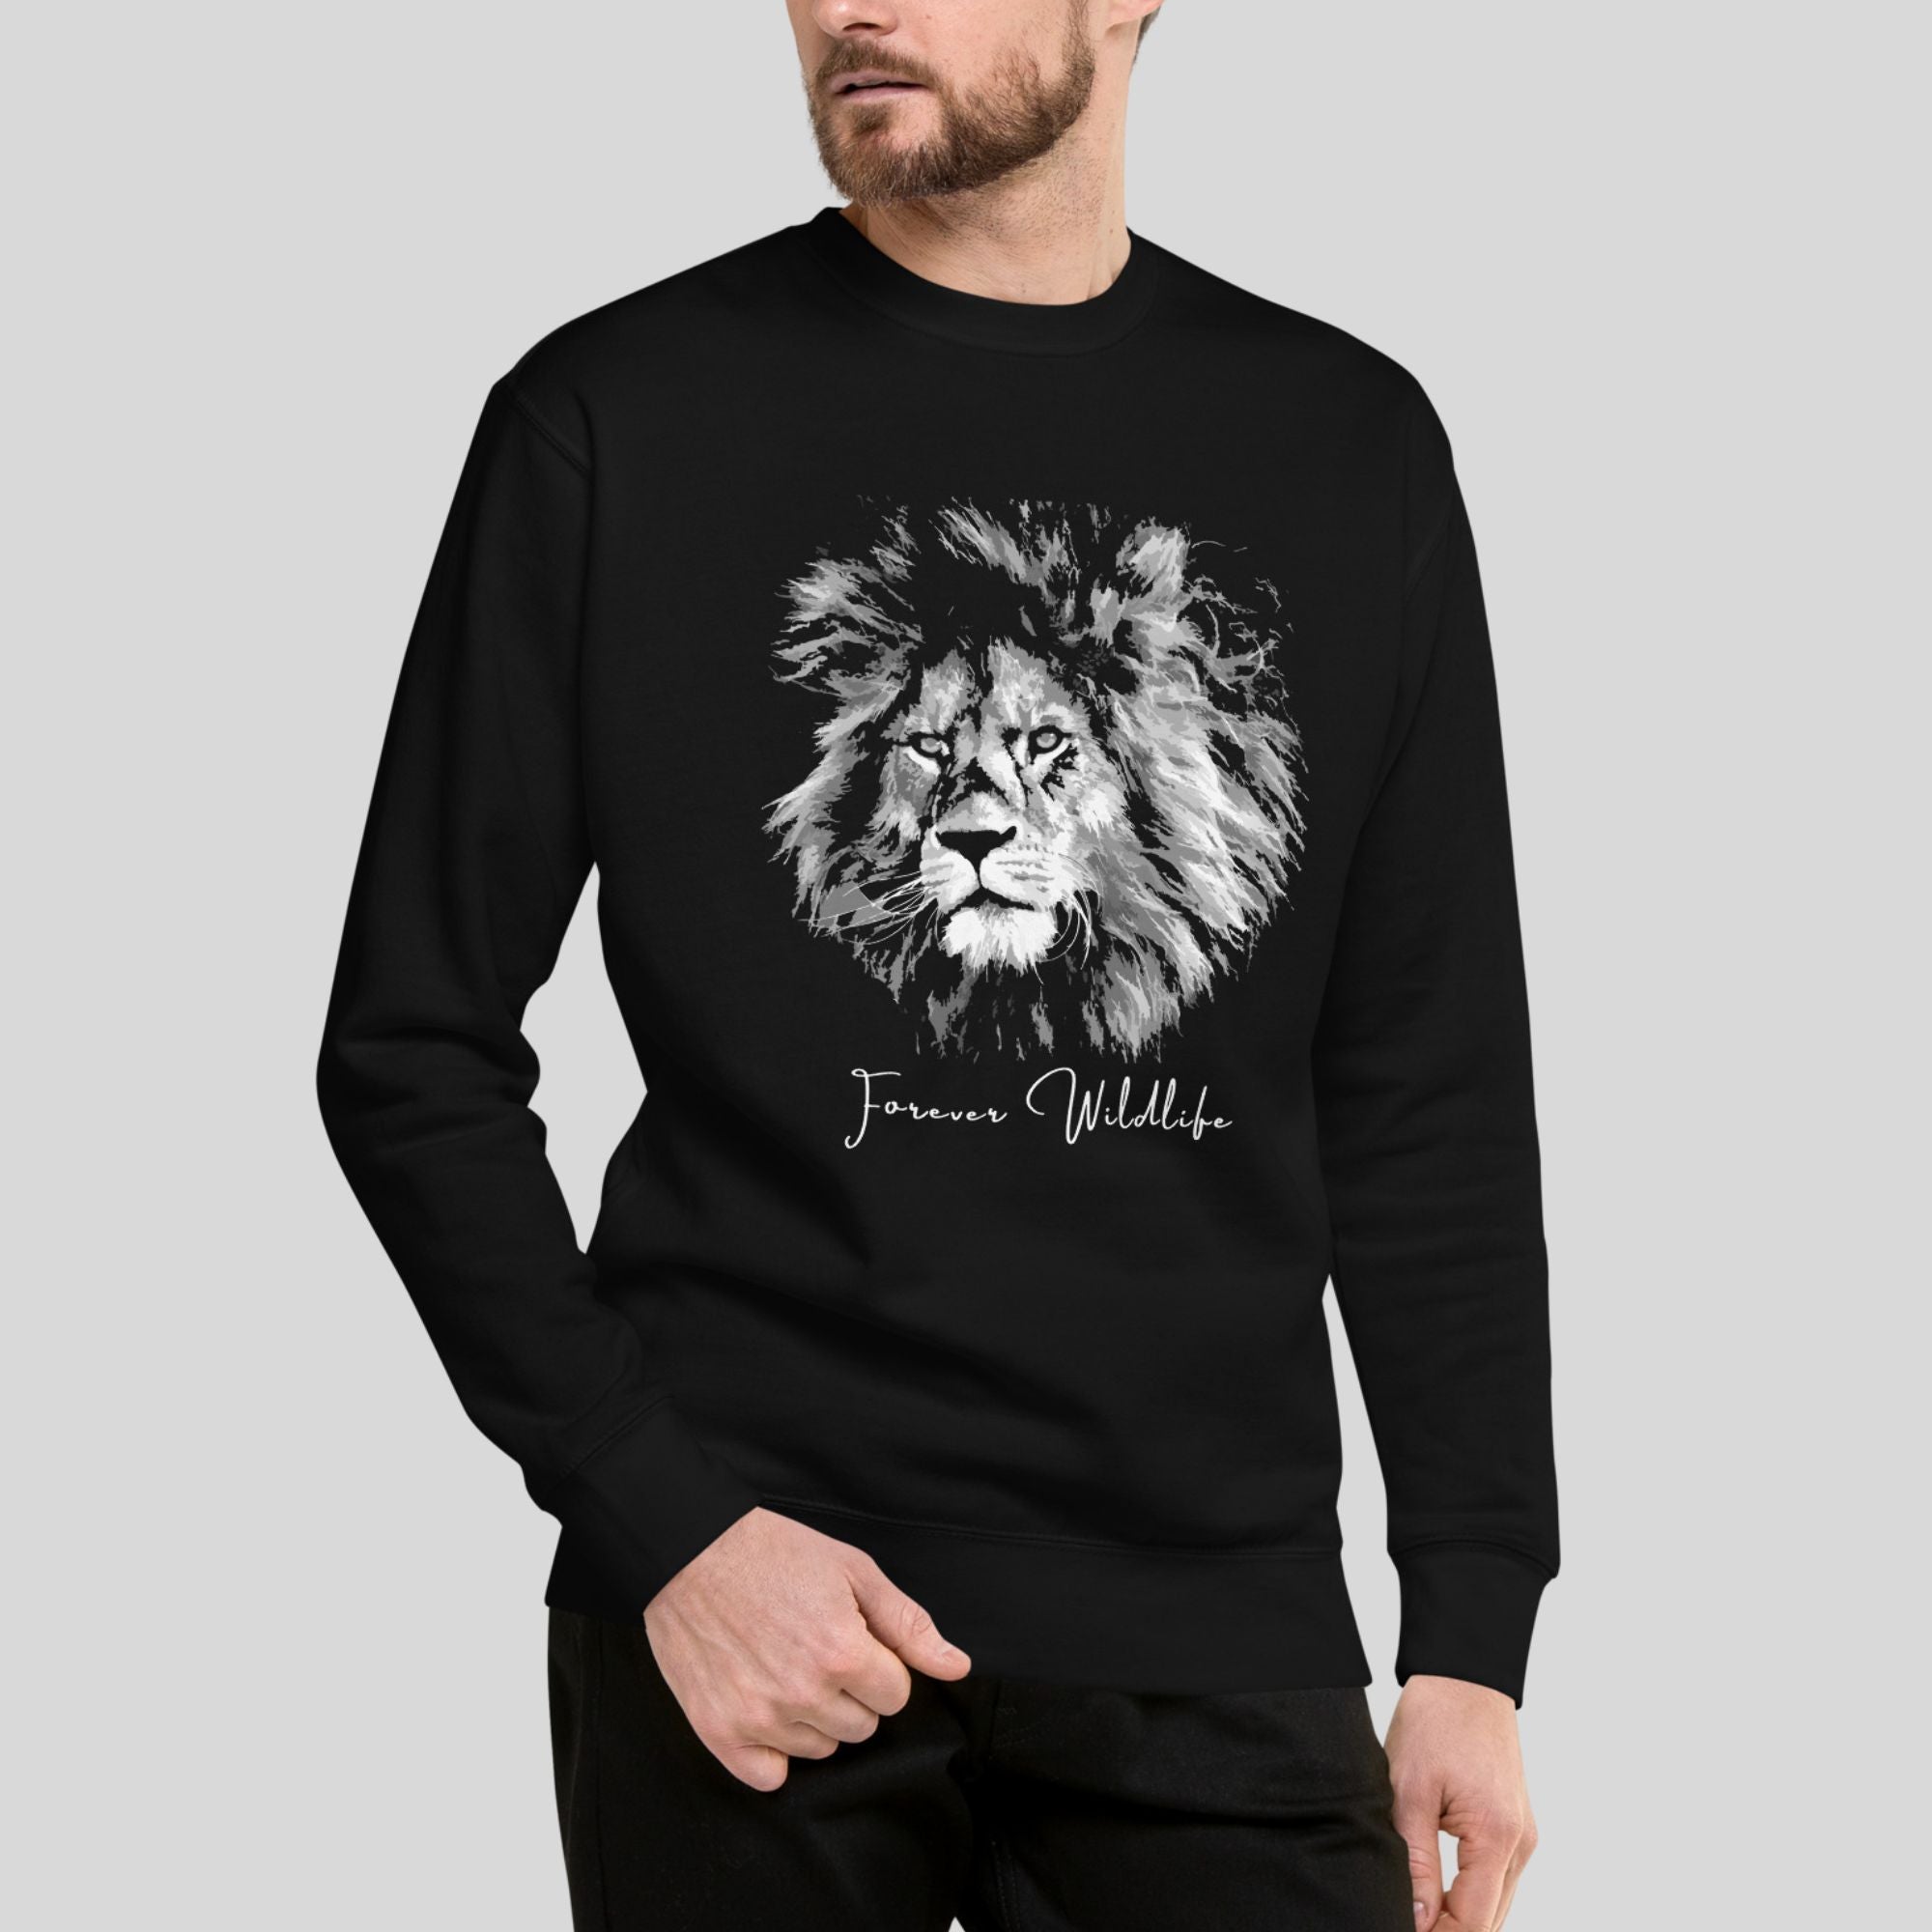  Inspirational Hoodies, Sweatshirts, T Shirts mockups, Best inspirational Hoodies & Inspiration Hoodies with Animal Graphics as part of Wildlife Clothing & Apparel from Forever Wildlife.